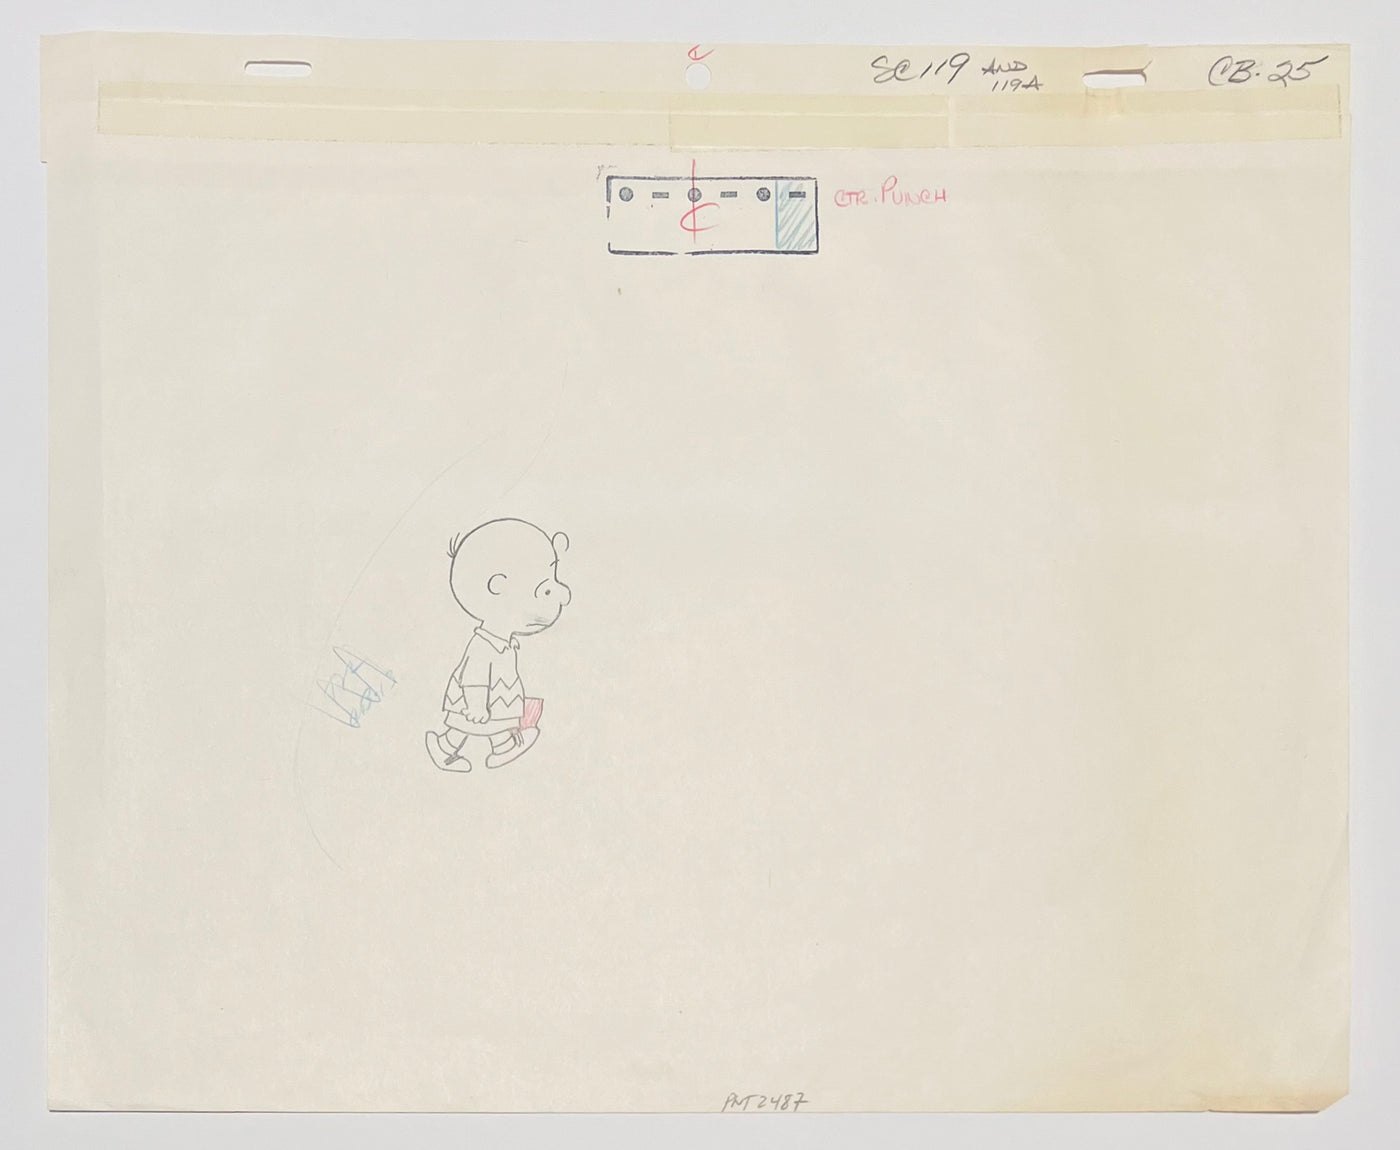 Original Peanuts Production Cel with 2 Production Drawings featuring Charlie Brown, Schroeder, Pig-Pen, and Patty